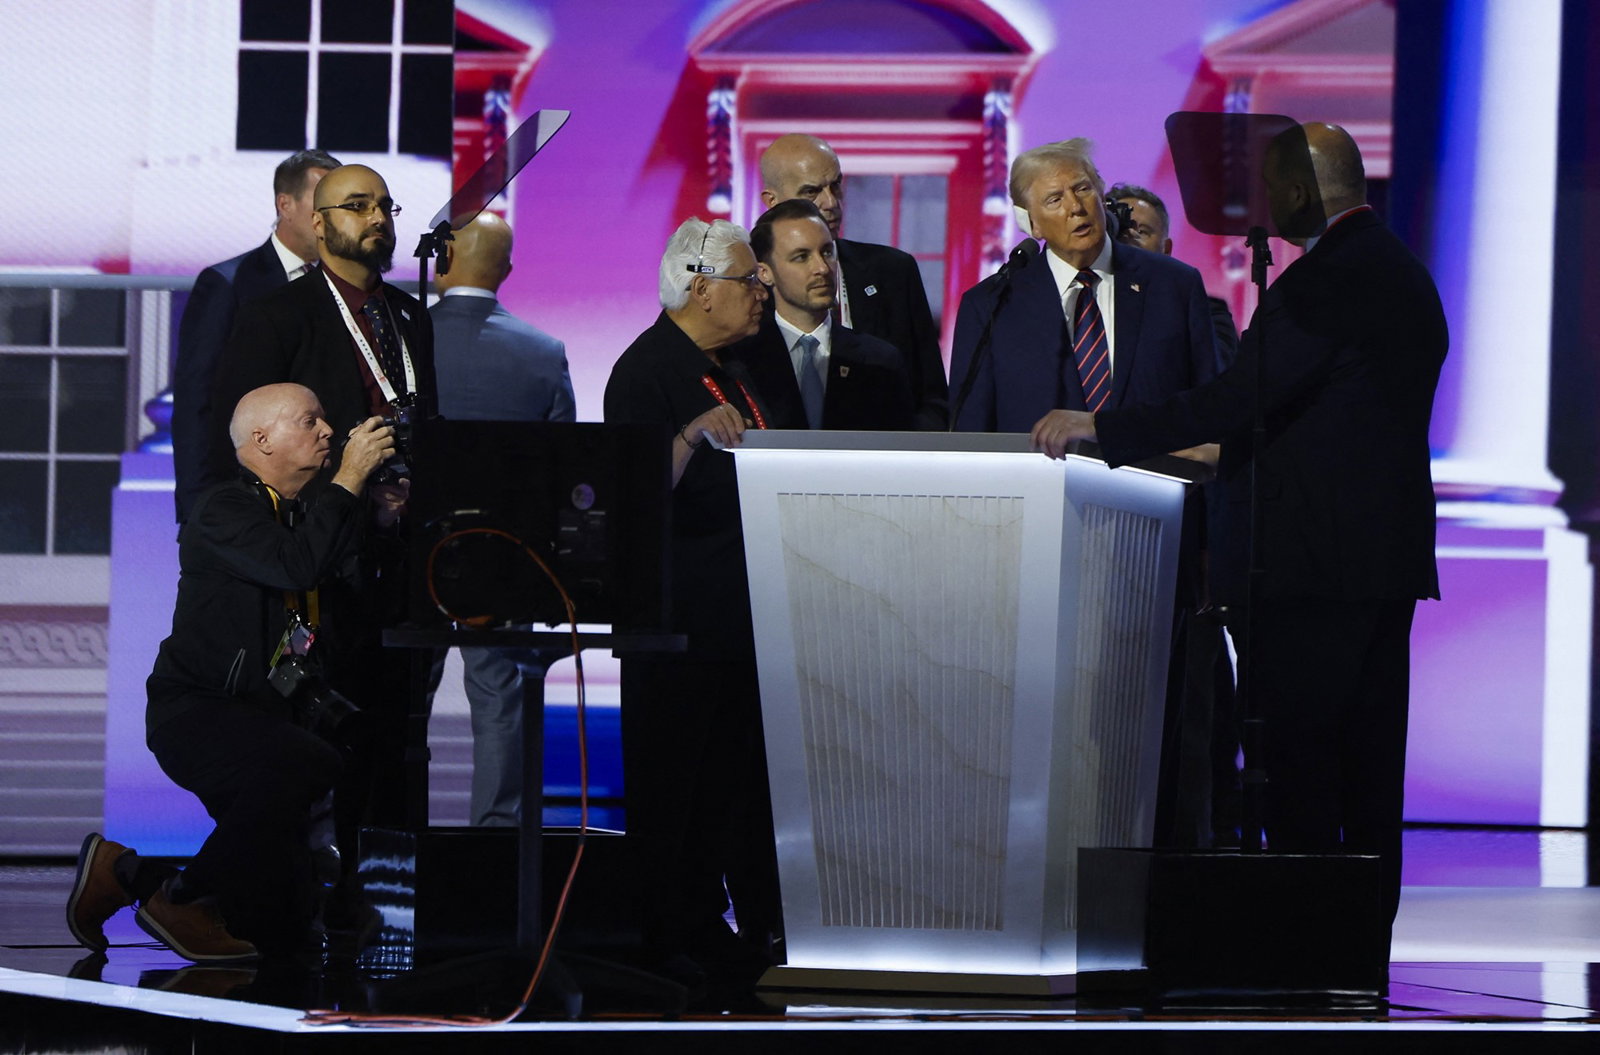 A bunch of stage hands gather around Trump on stage